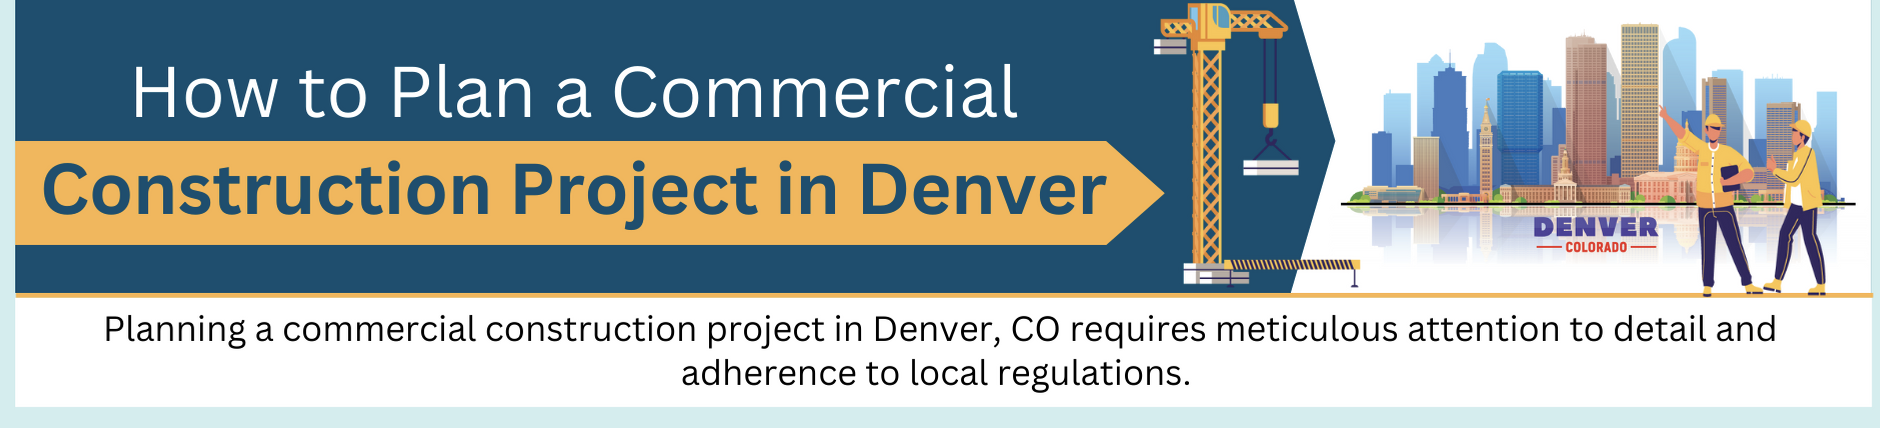 Shower and Restroom Trailer Rentals 1692712138 Screenshot 2023 08 22 at 8.48.54 AM - How to Plan a Commercial Construction Project in Denver, CO: A Step-by-Step Guide